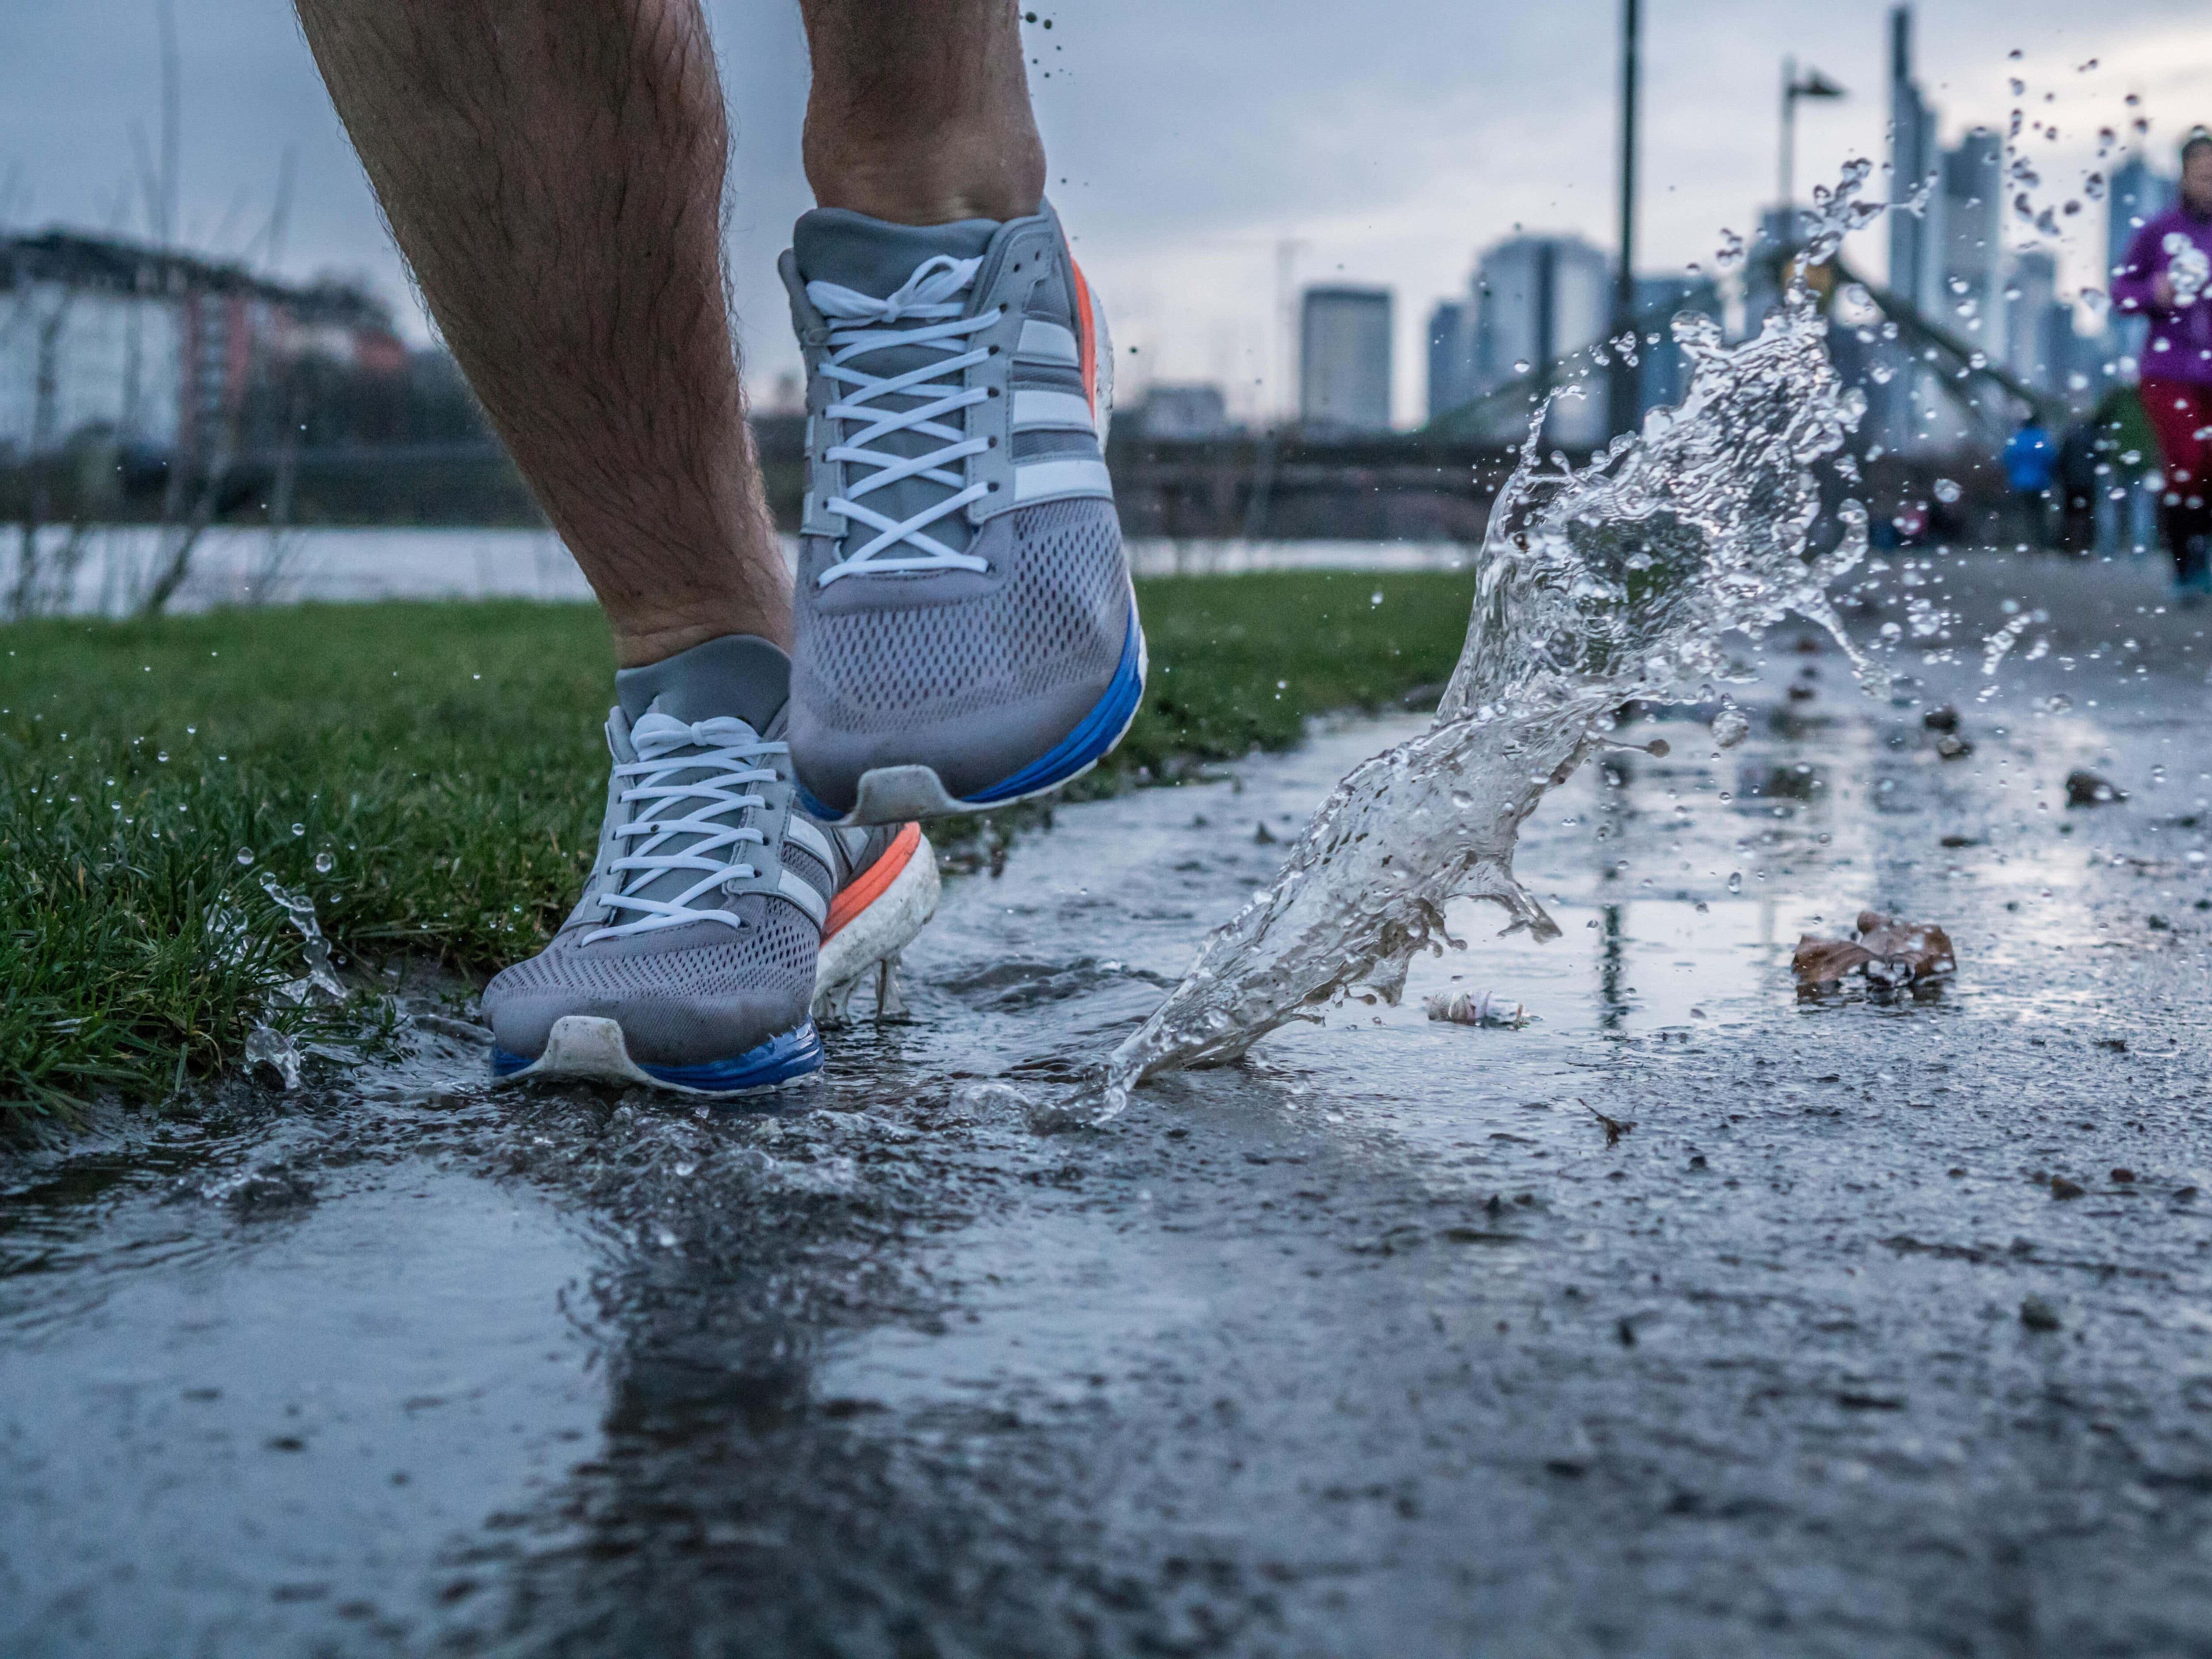 Rain could dampen prospects for thousands of London Marathon runners